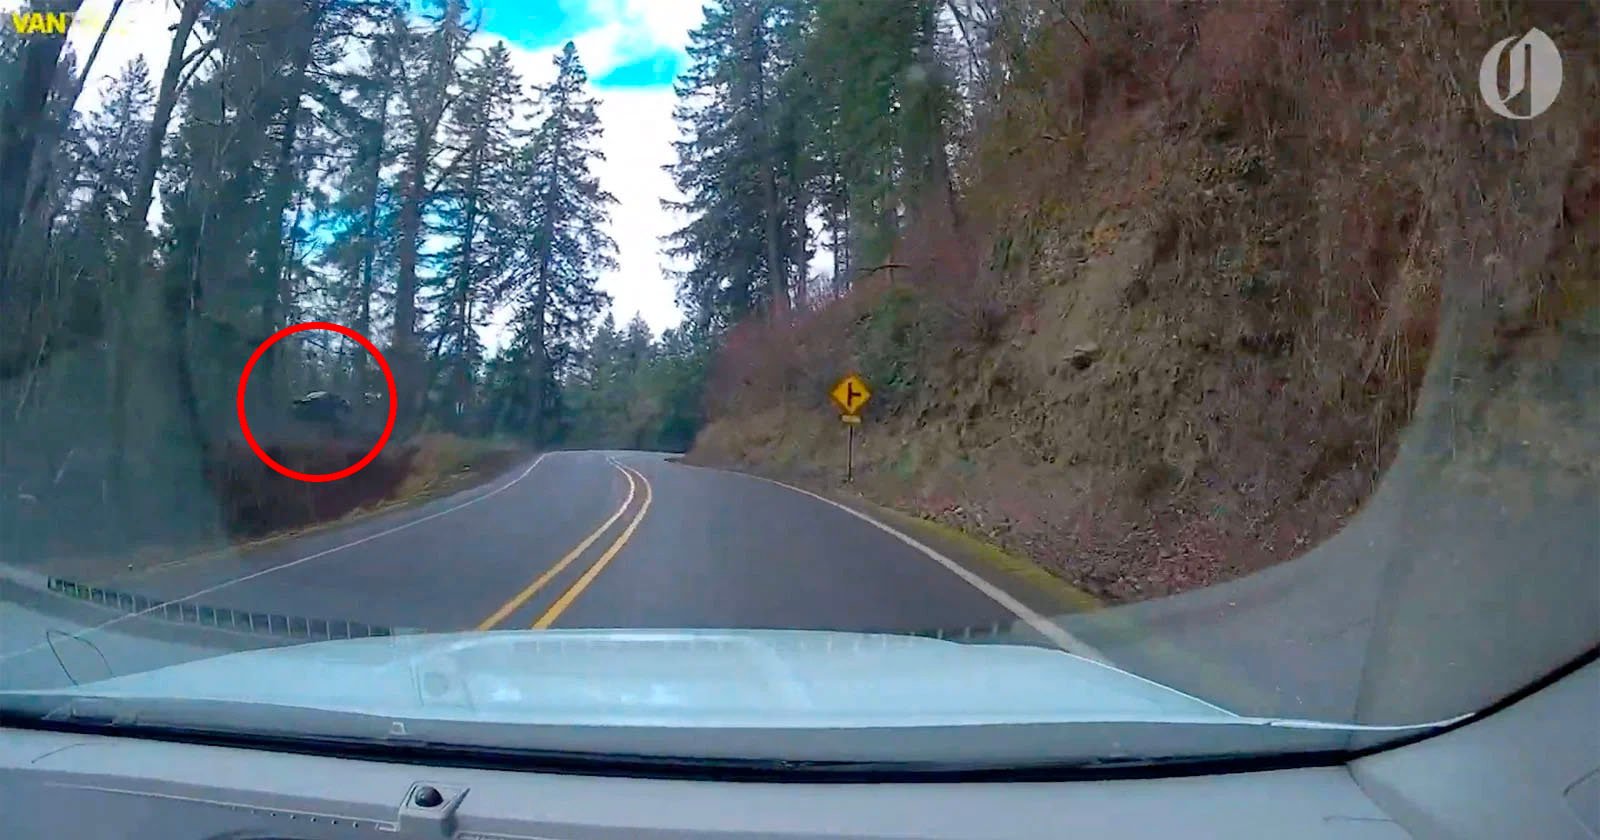  horrifying dashcam video shows car fly down 200-foot 